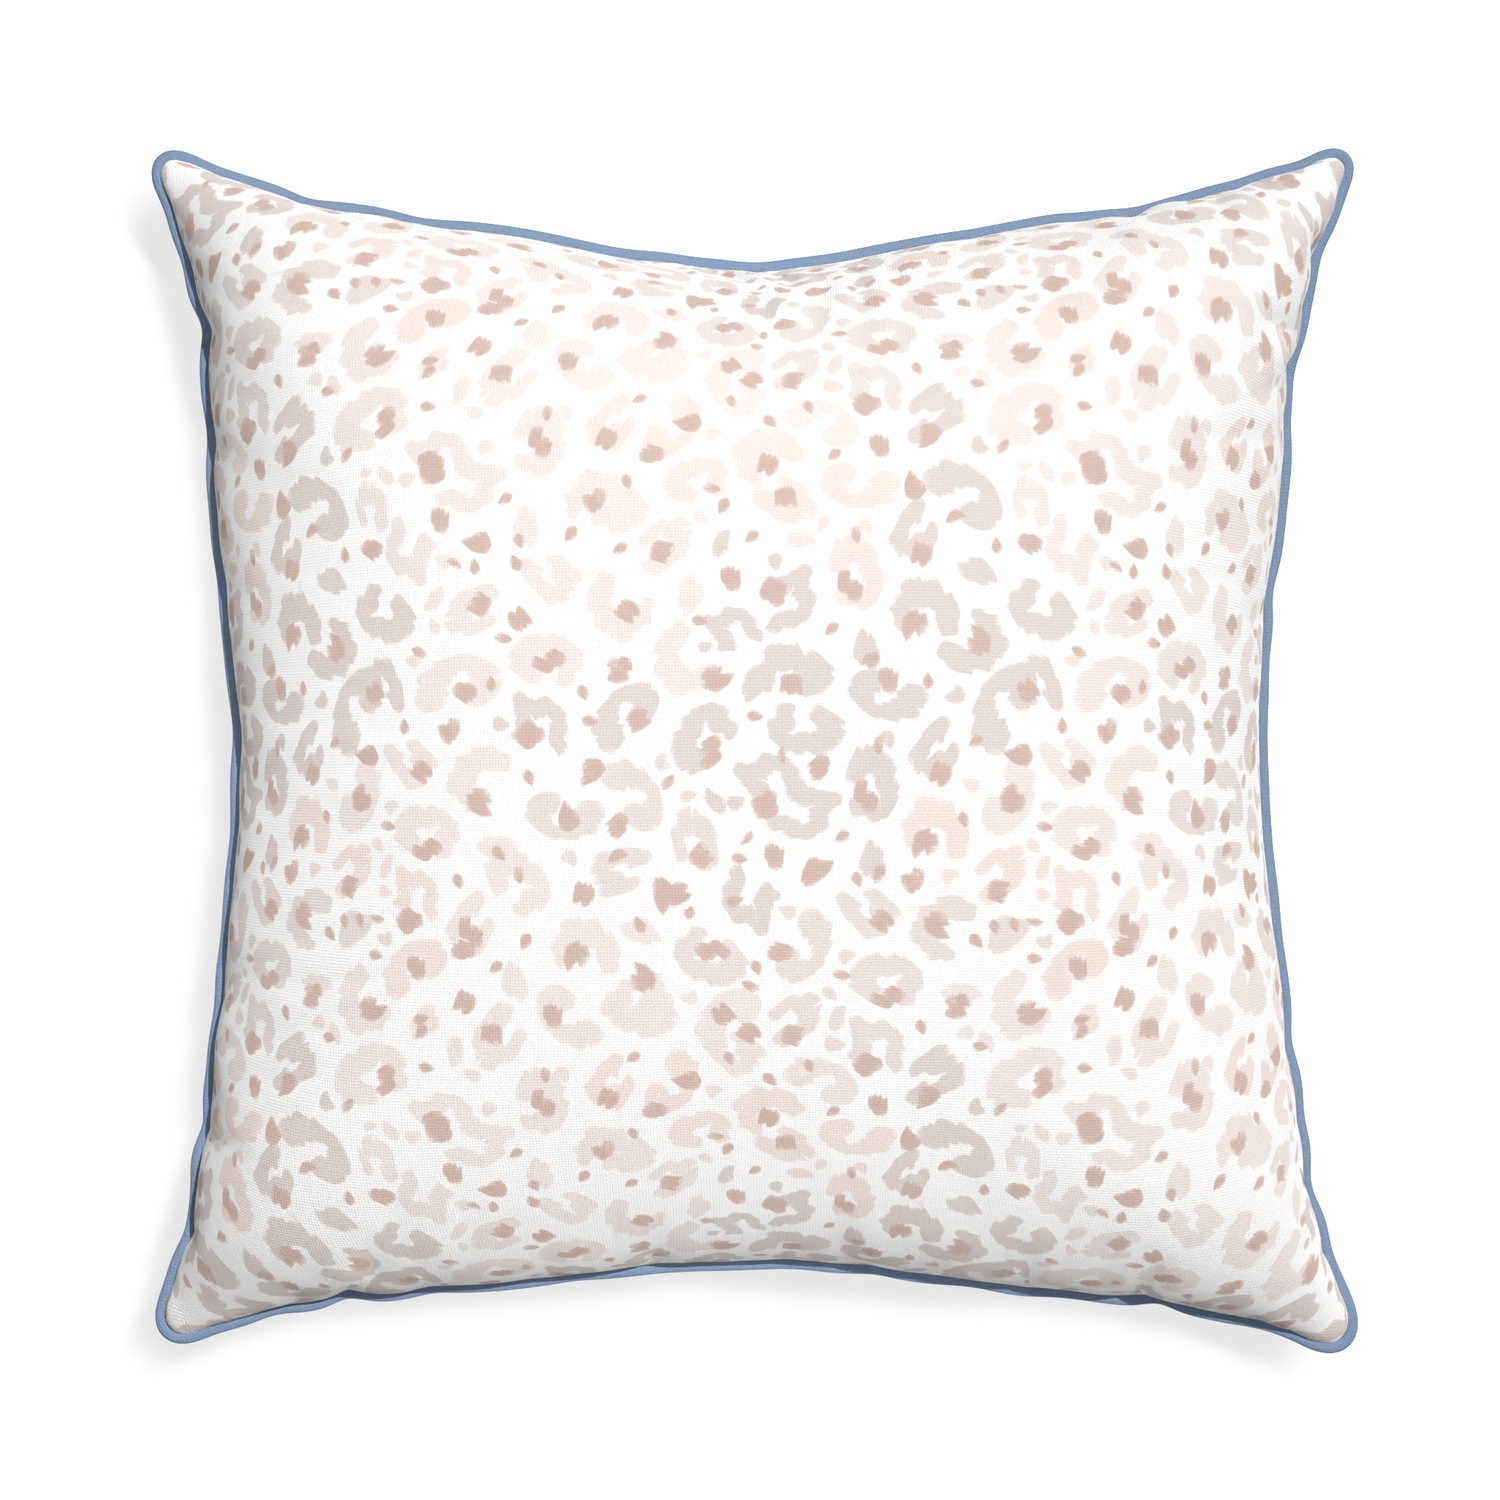 Euro-sham rosie custom beige animal printpillow with sky piping on white background